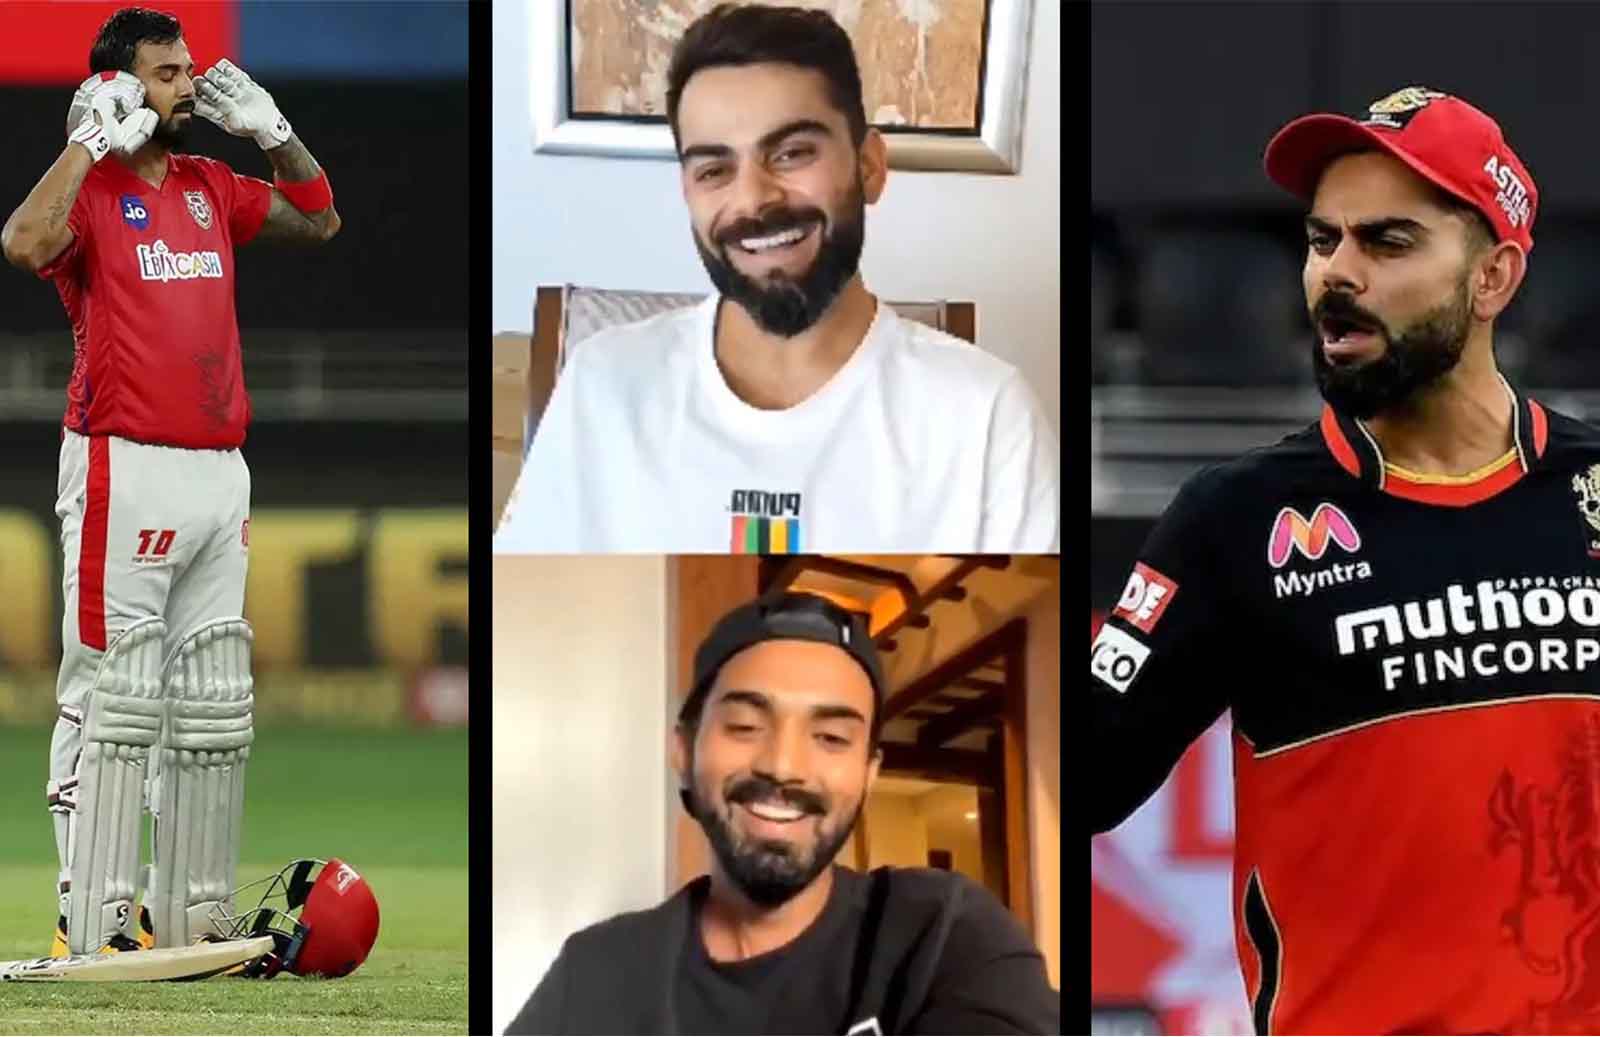 I Would Ask IPL To Ban Virat Kohli and AB de Villiers From Next Year: KL Rahul